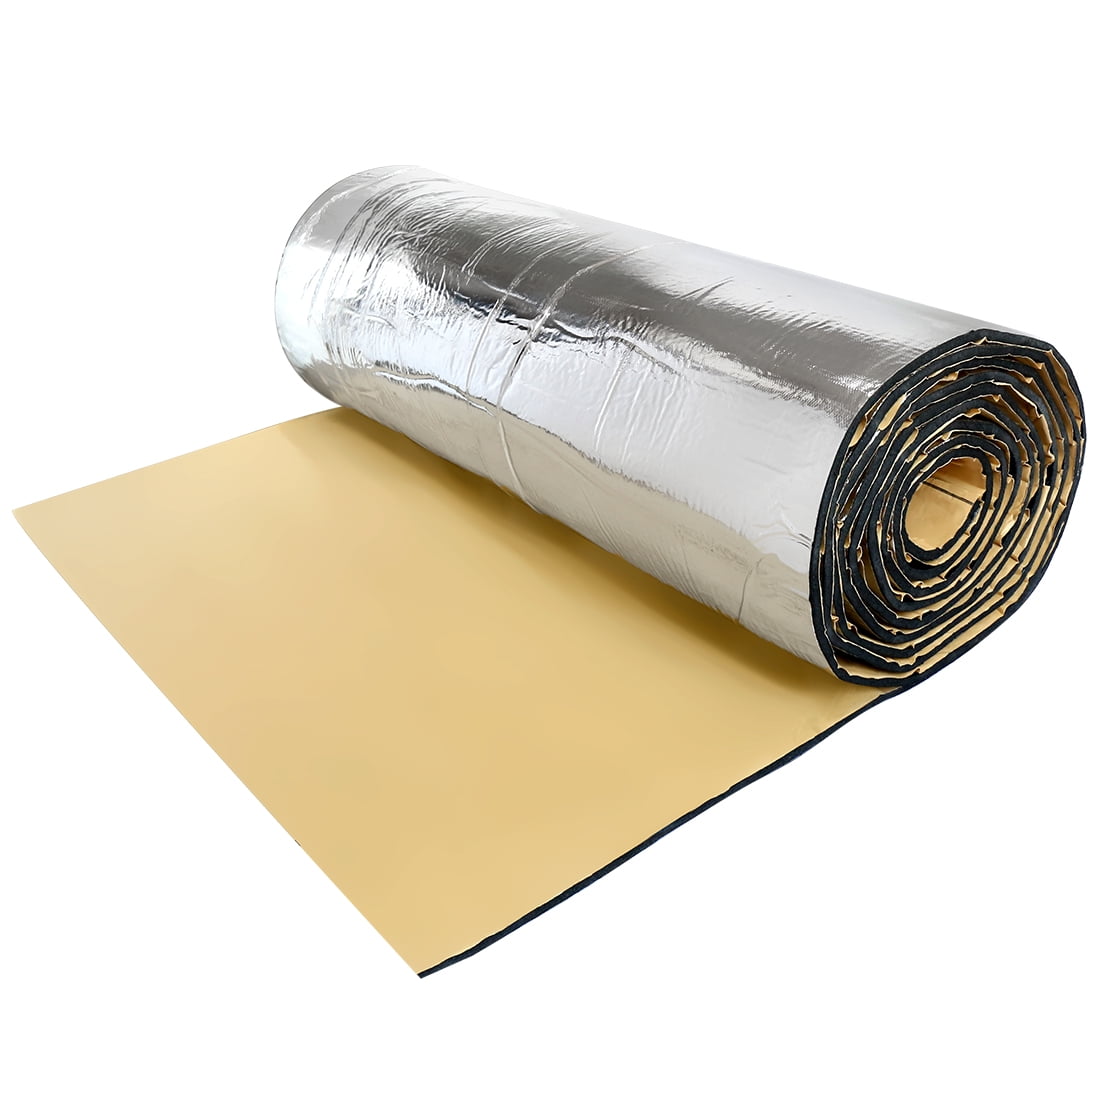 Sound proofing Ultimate Thermal Reinforced Foil Insulation Adhesive backed 10mm, 2m x 1m